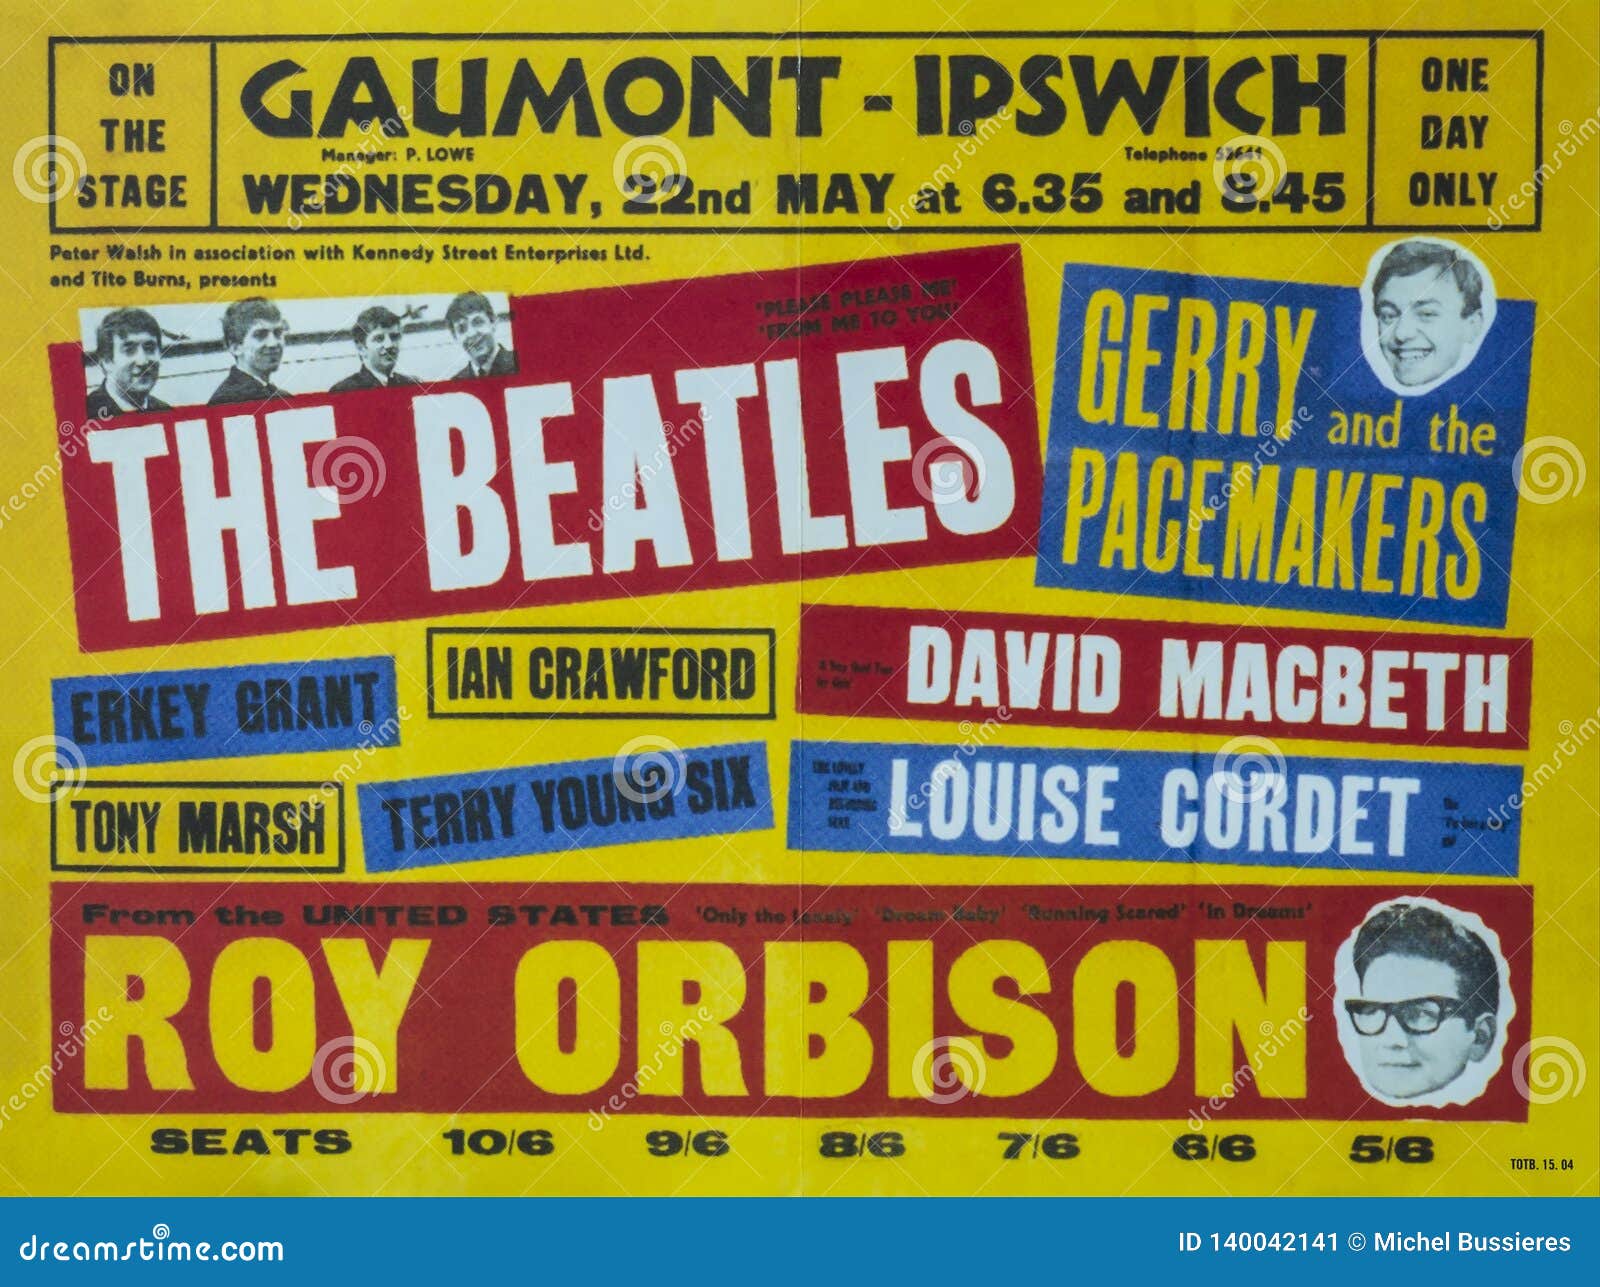 BEATLESBritish 60's Rock Band Concert Tour Posters19 to choose from.